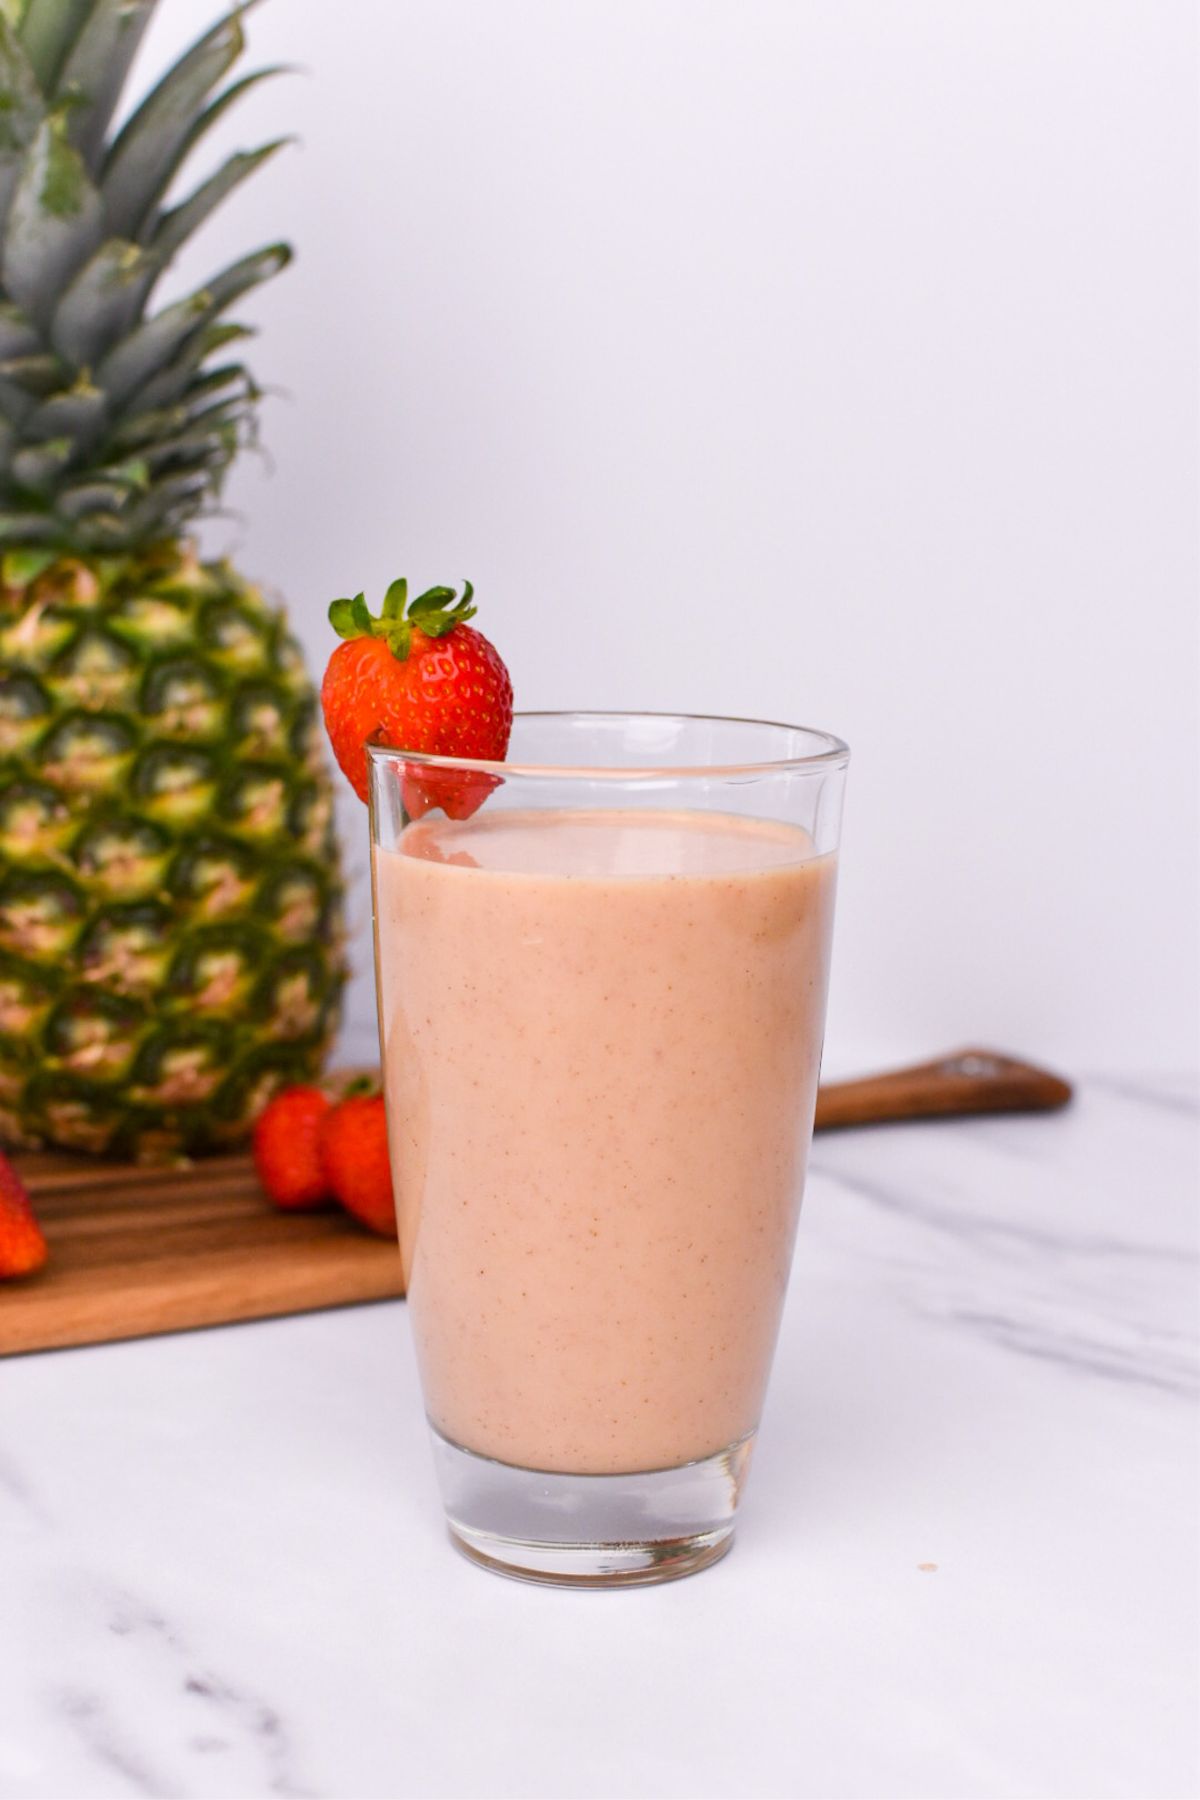 A smoothie in a glass with a strawberry on the rim and pineapple and strawberries in the background.